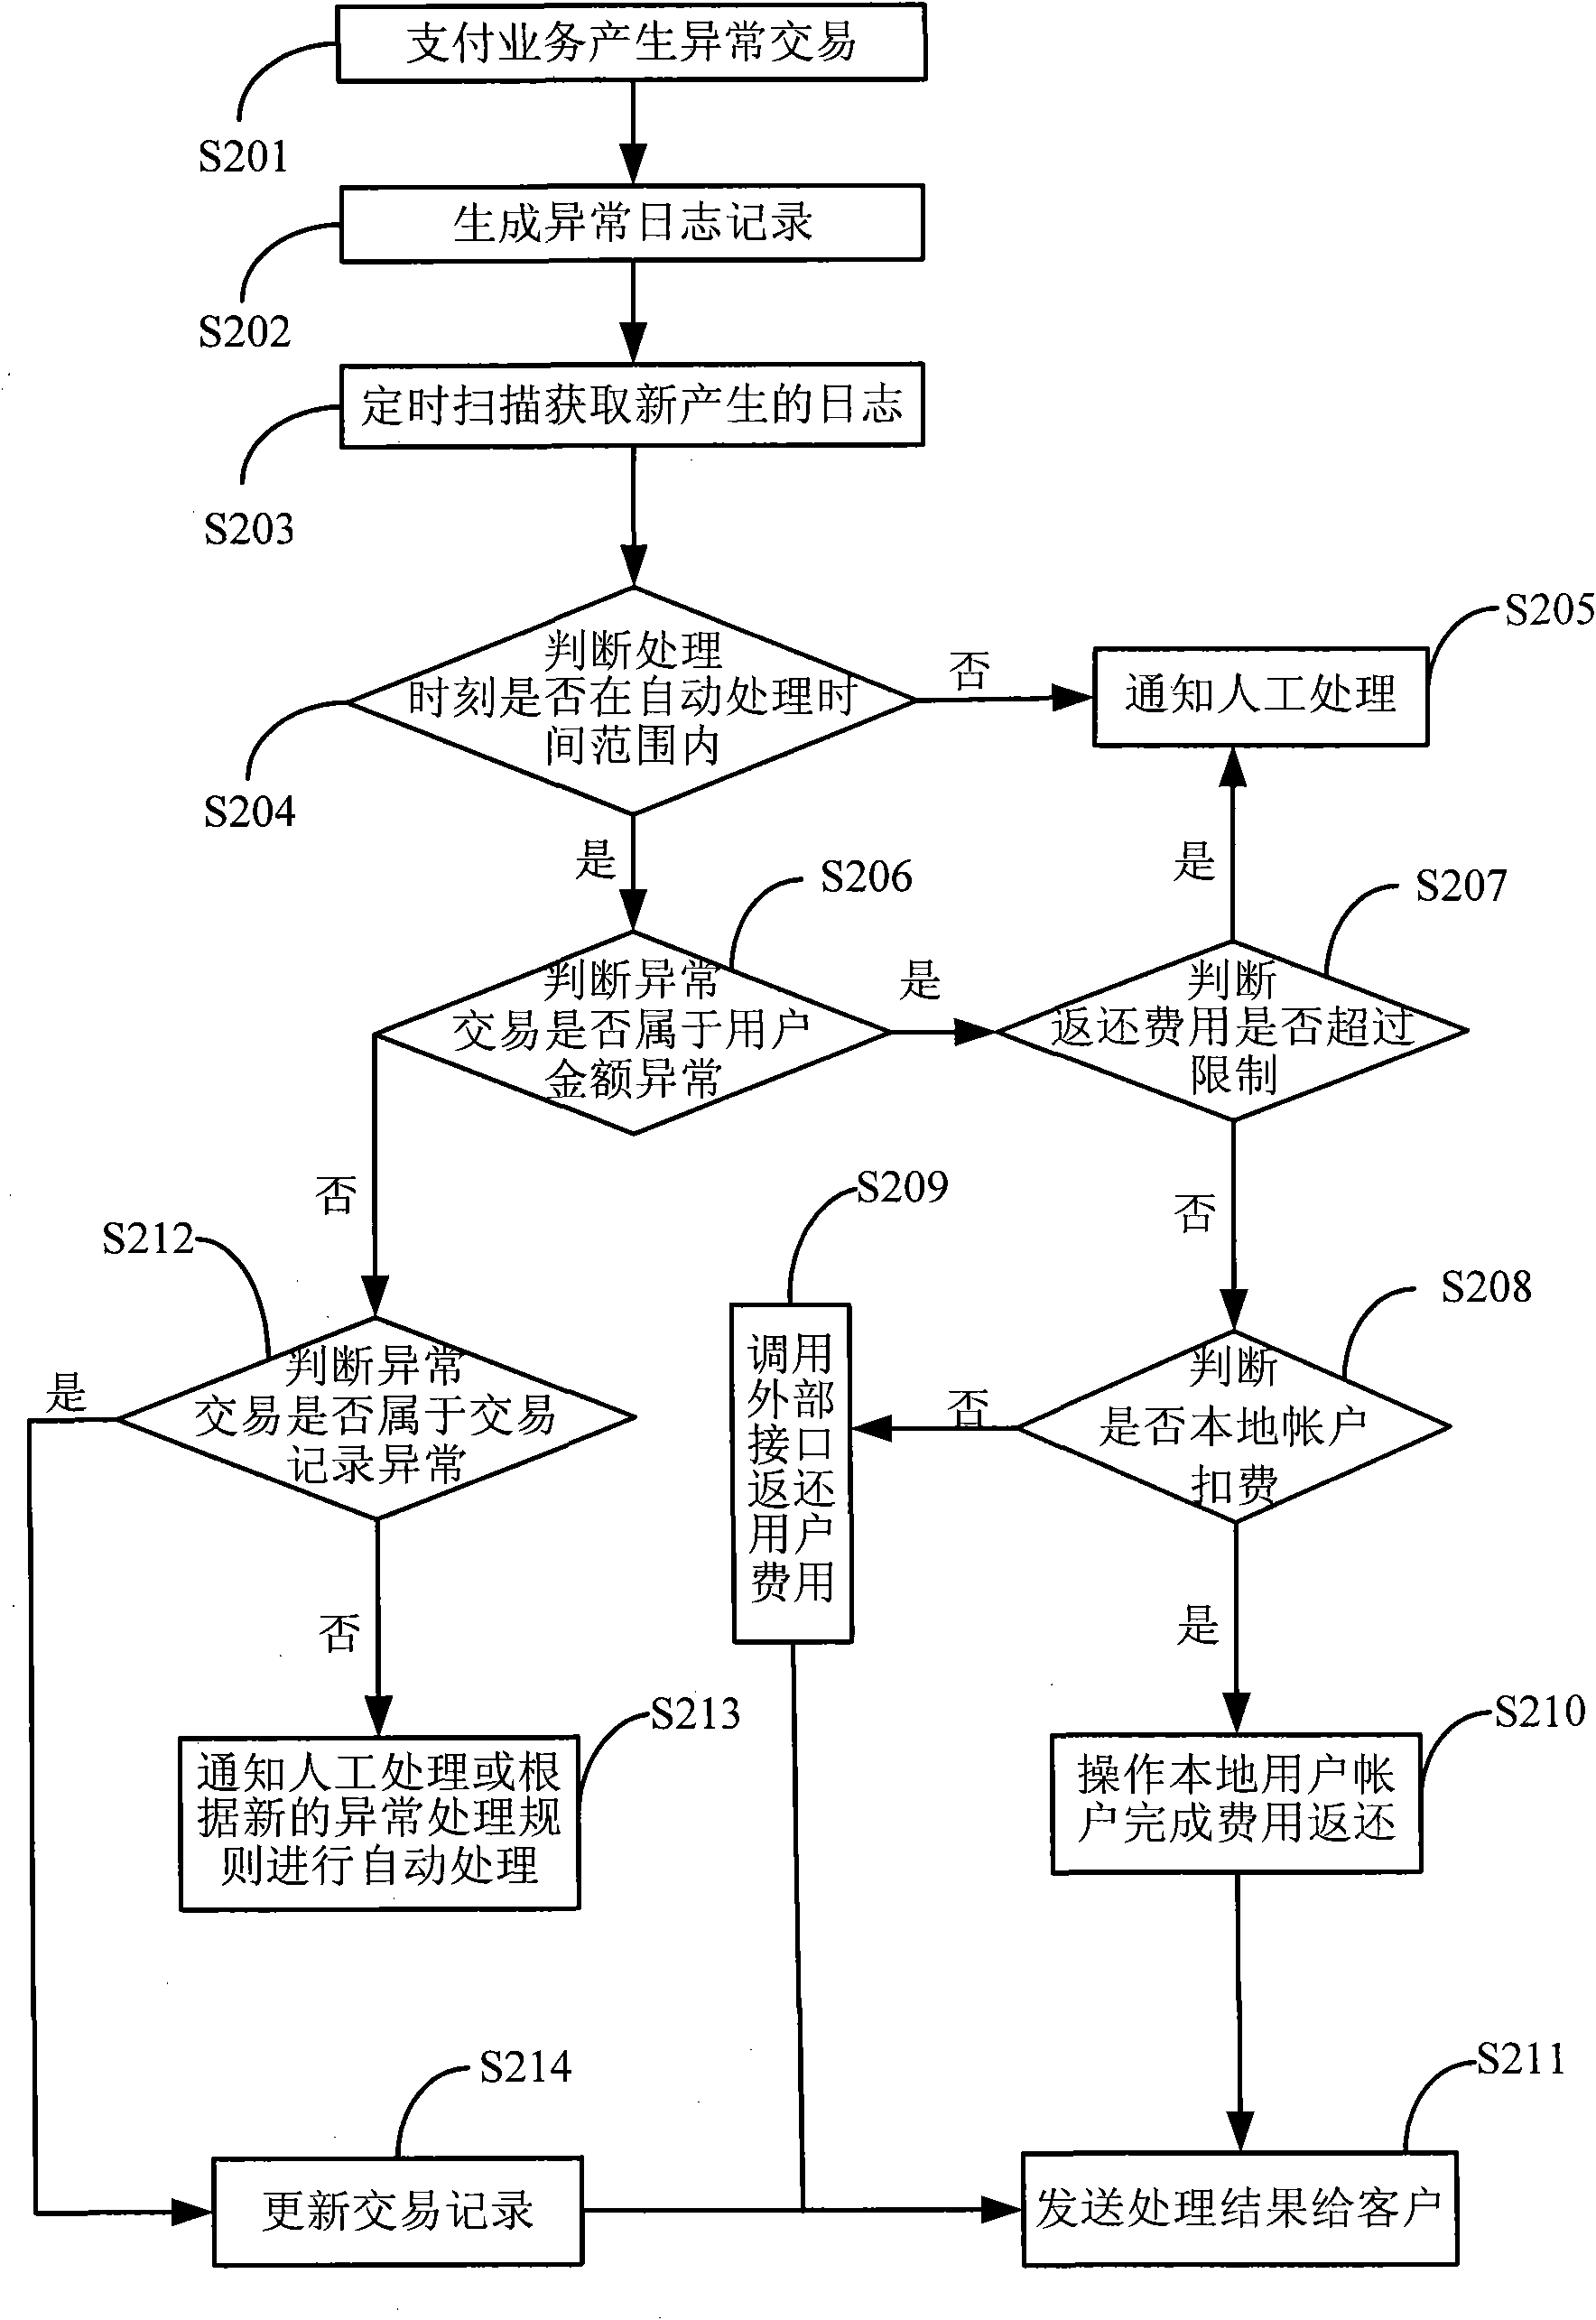 Method and system for handling abnormal transactions of payment services